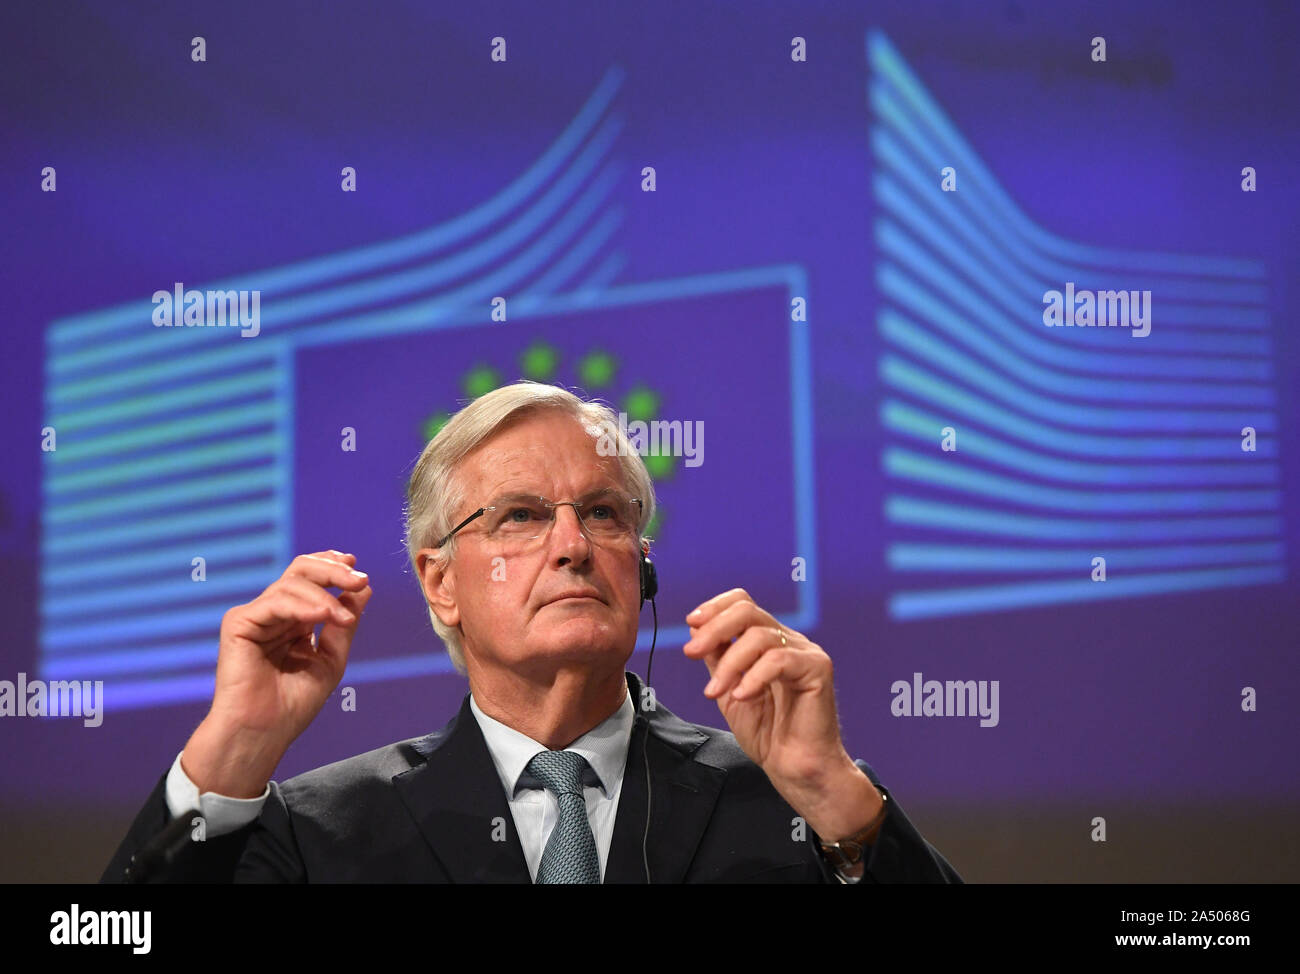 Michel Barnier, the EU's Chief Brexit Negotiator, attends the European Council summit at EU headquarters in Brussels. Stock Photo